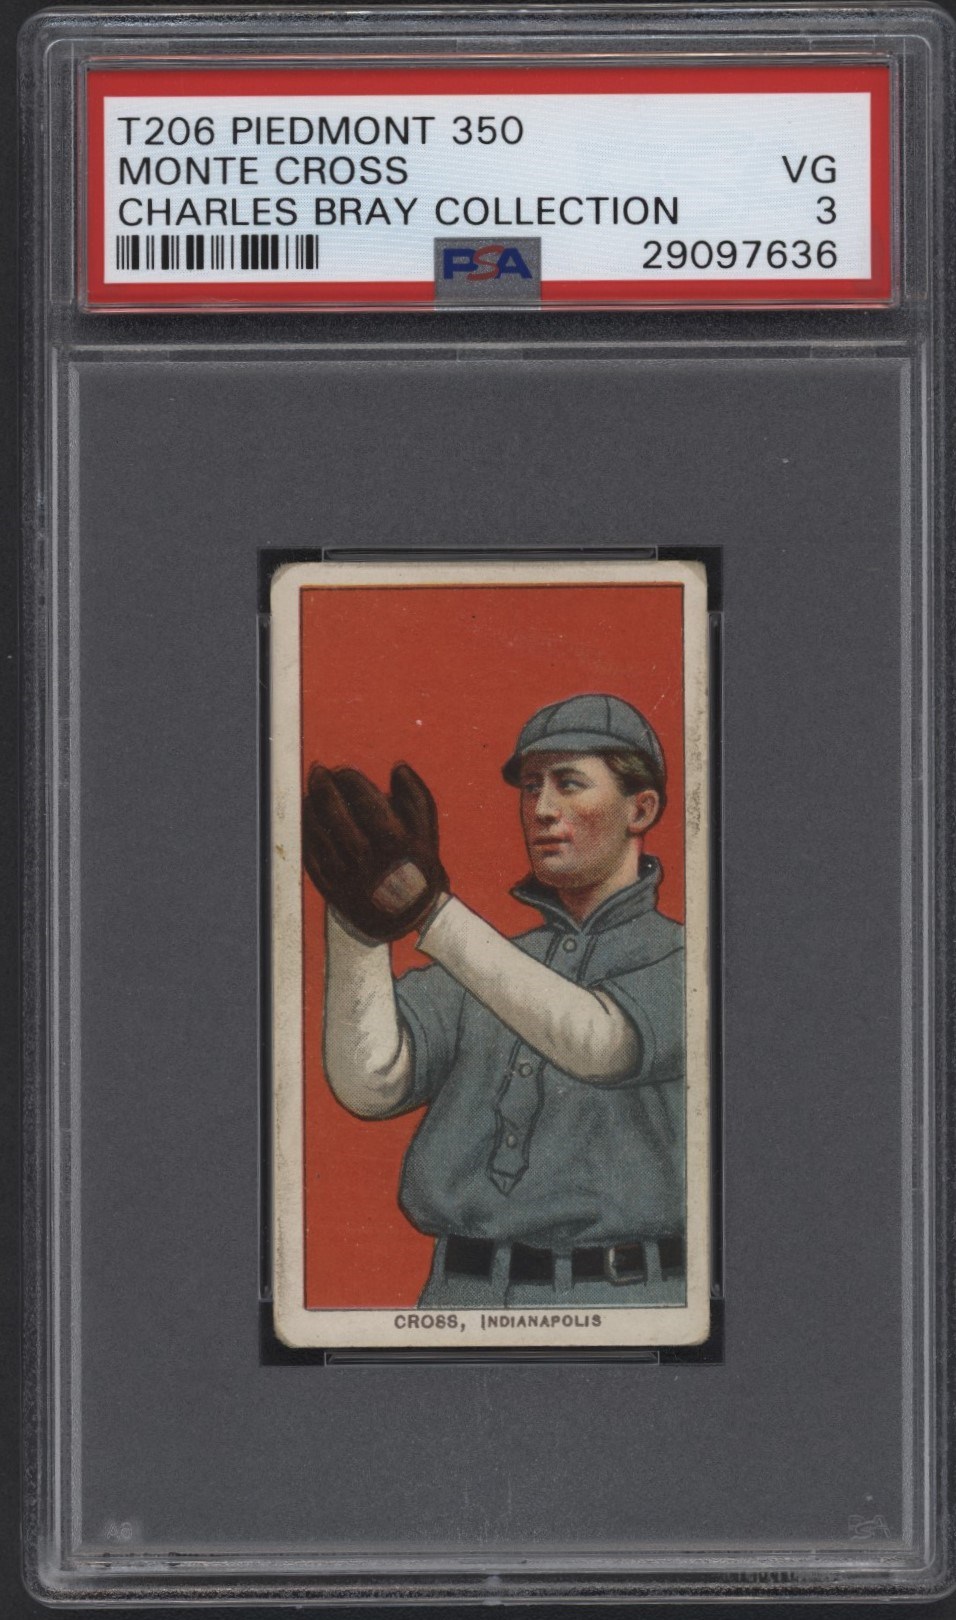 T206 Piedmont 350 Monte Cross PSA 3 From the Charles Bray Collection